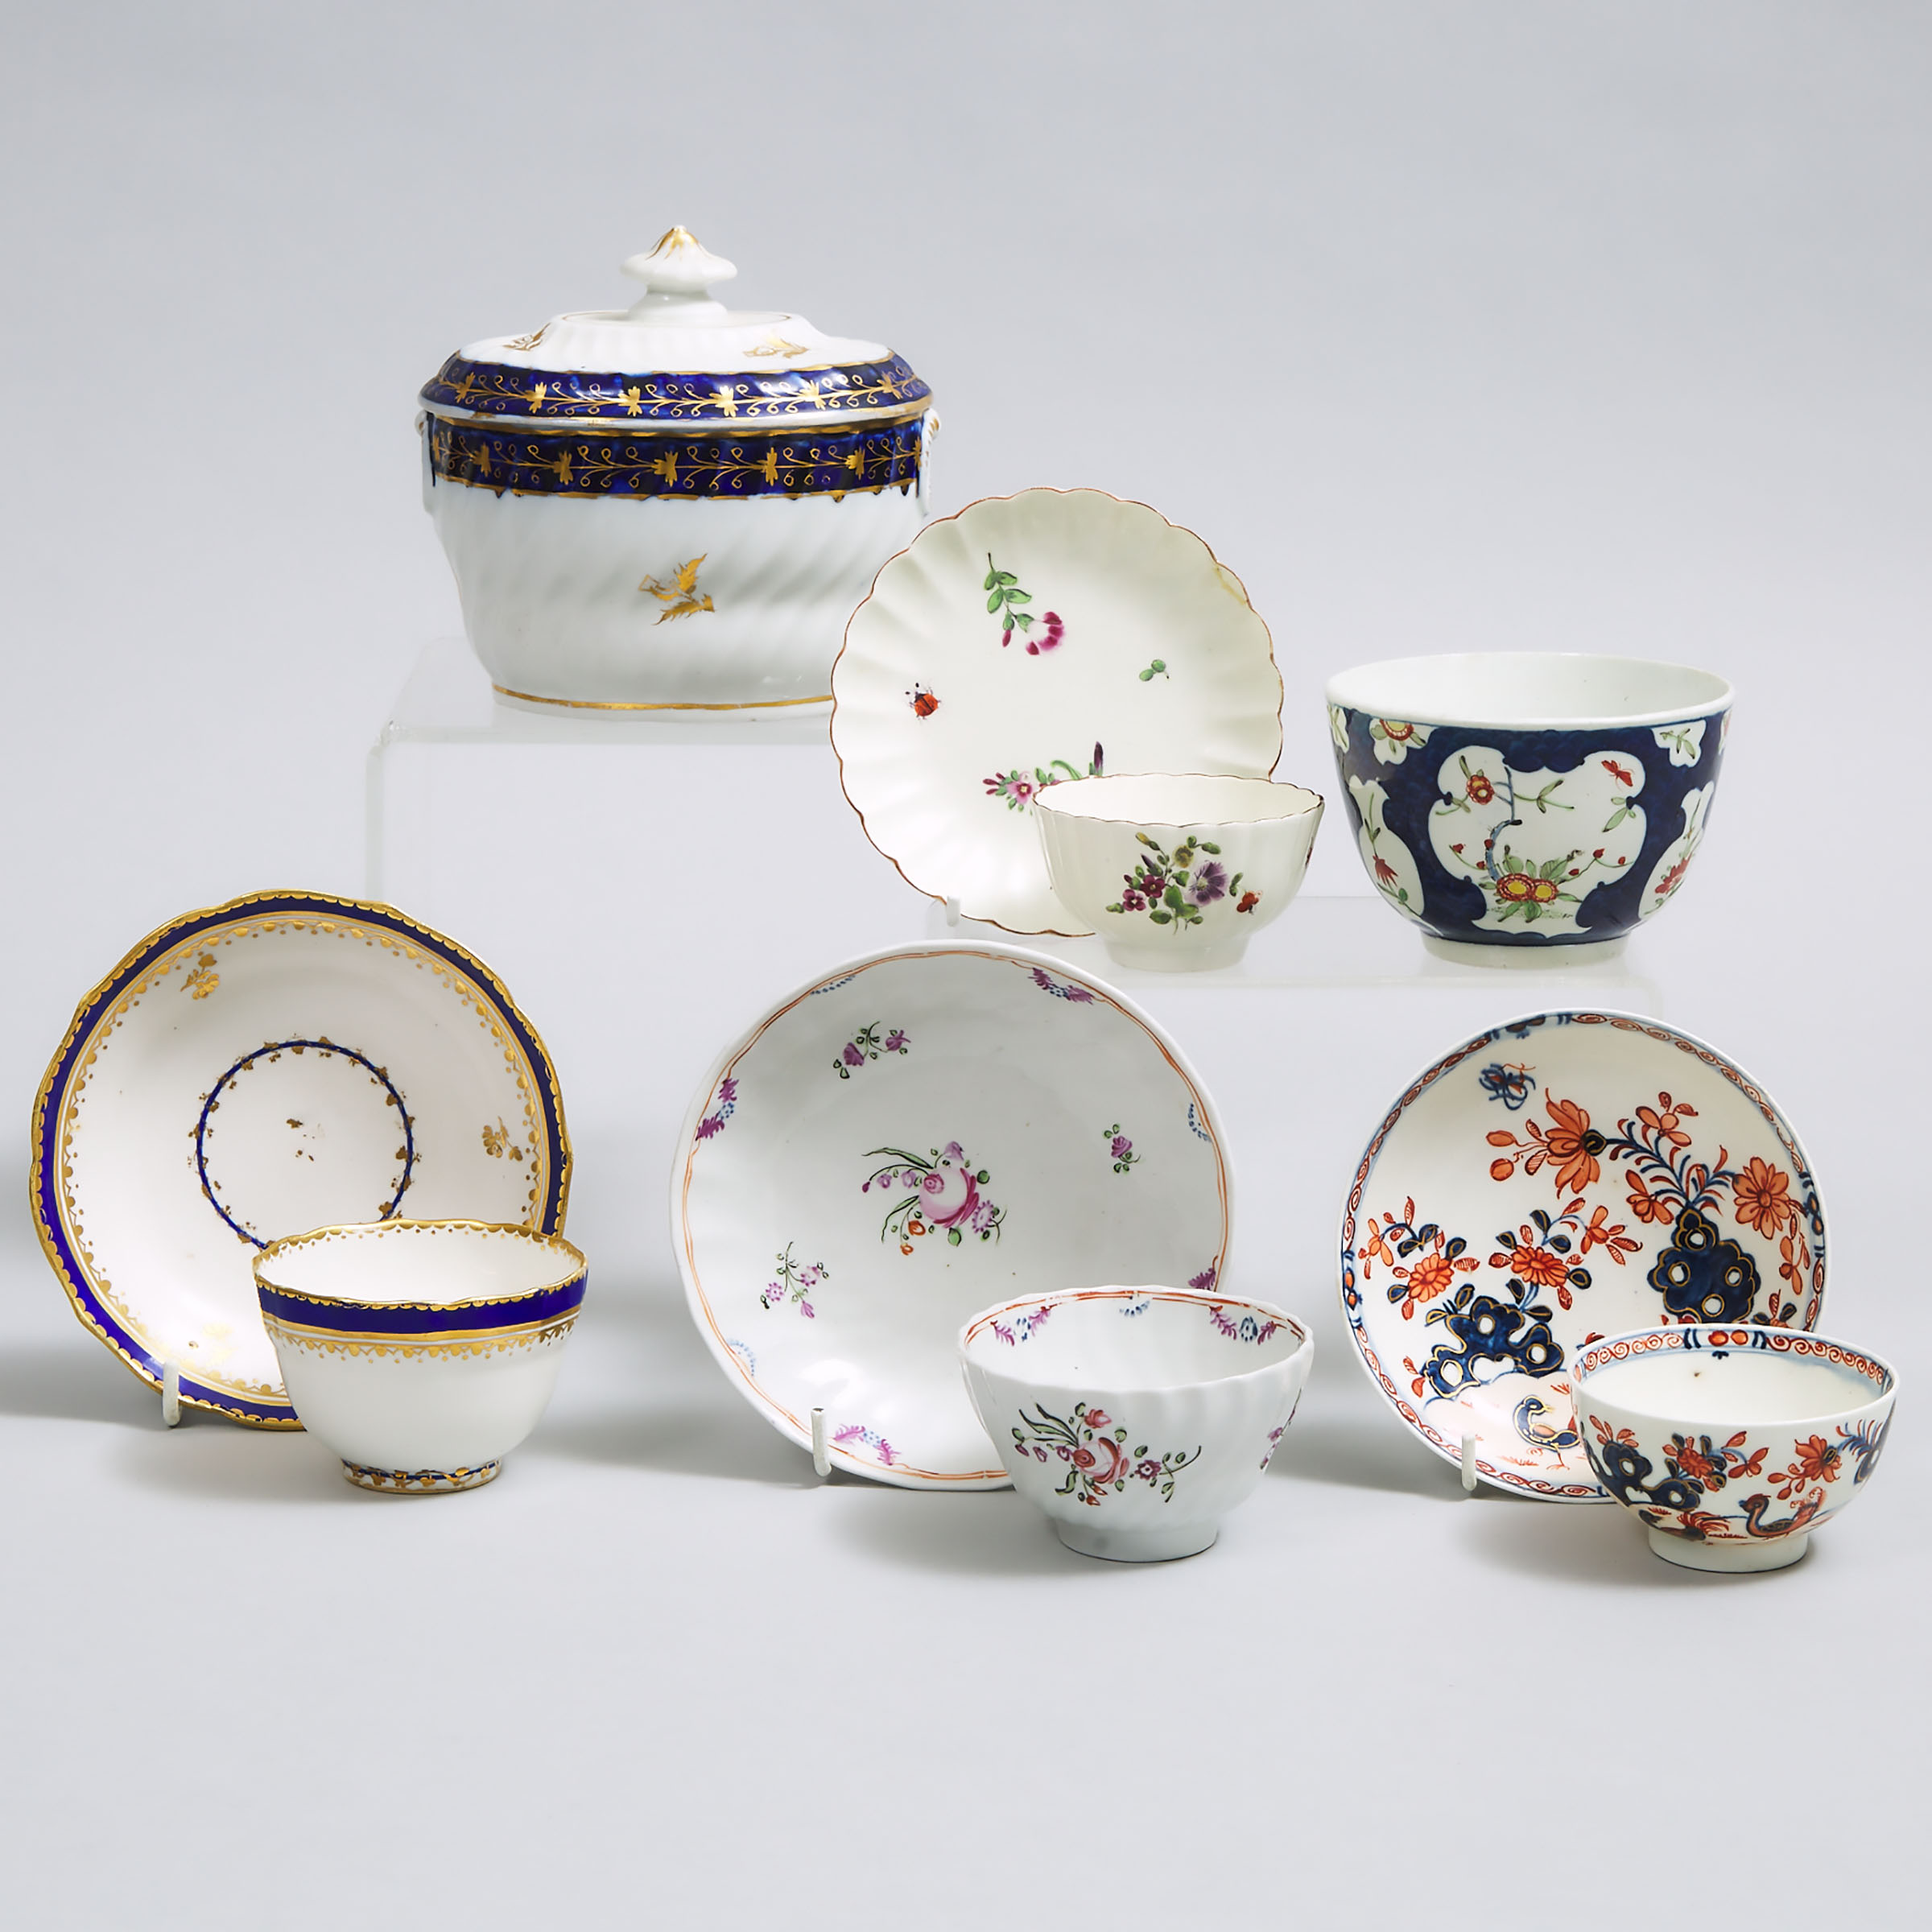 Group of English Porcelain, late 18th century